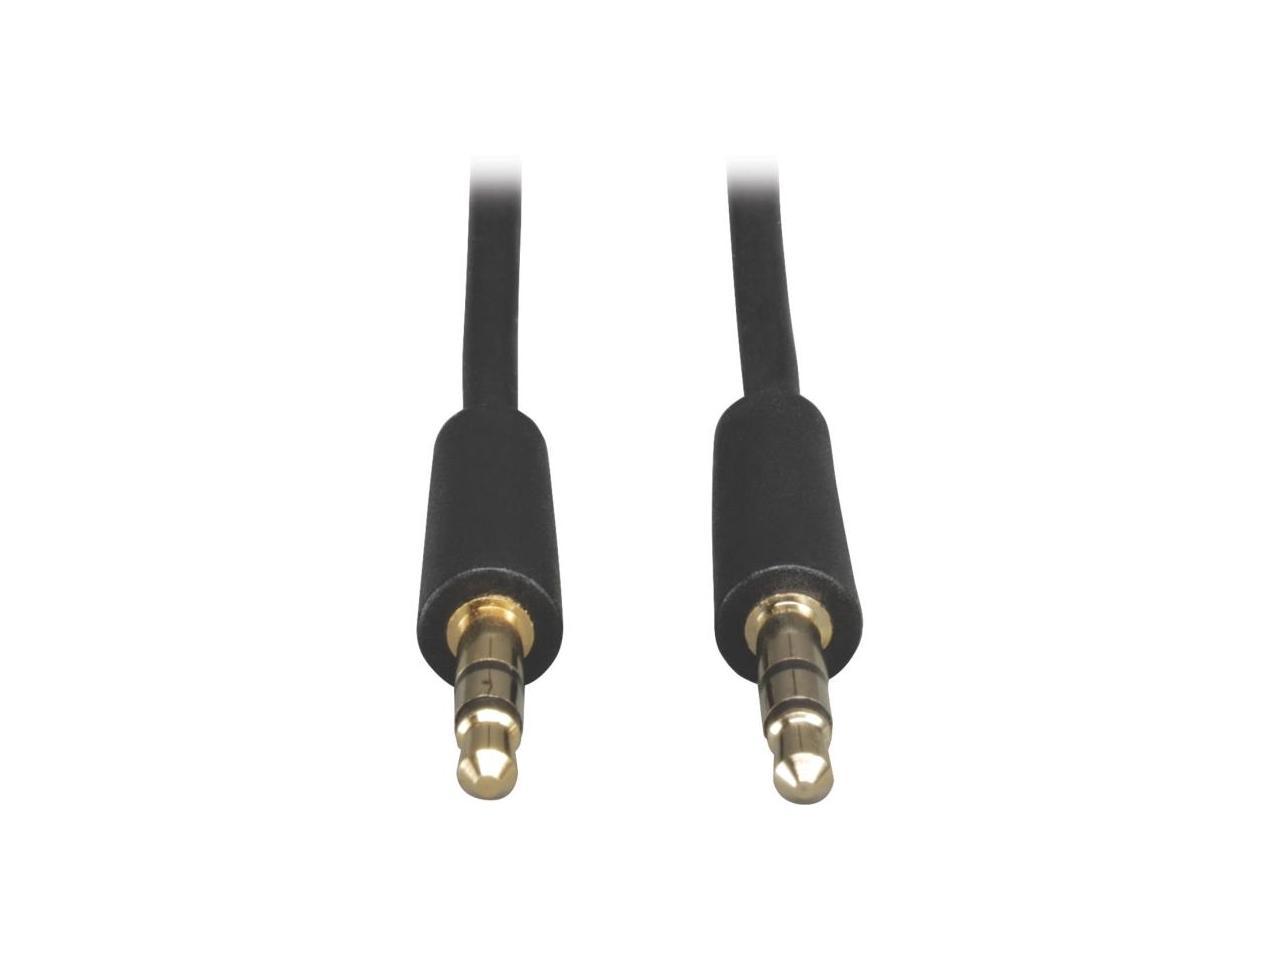 Tripp Lite P312-001 3.5mm Mini Stereo Audio Cable for Microphones, Speakers and Headphones Male to Male - image 4 of 4